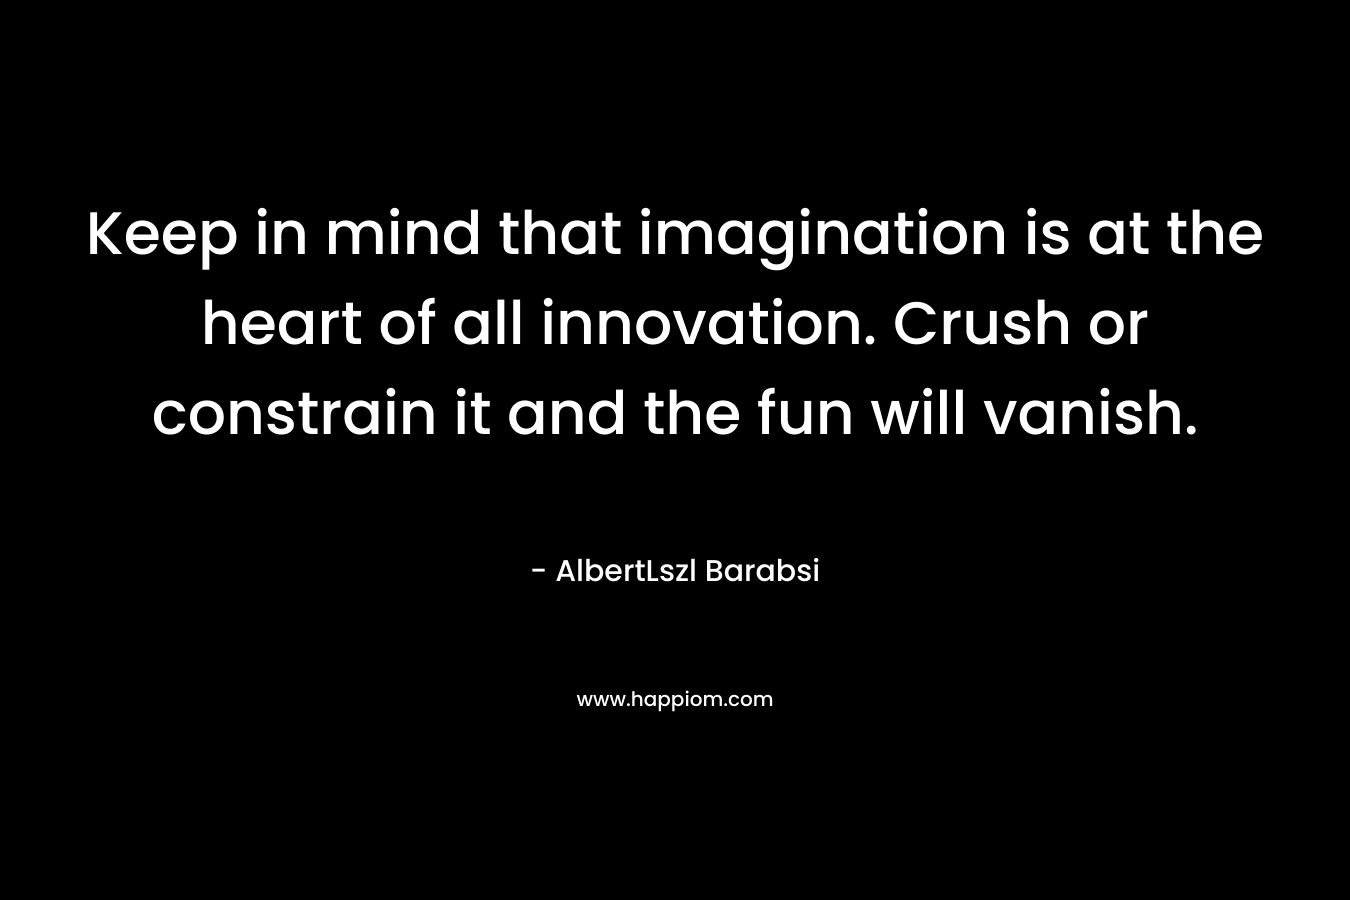 Keep in mind that imagination is at the heart of all innovation. Crush or constrain it and the fun will vanish.